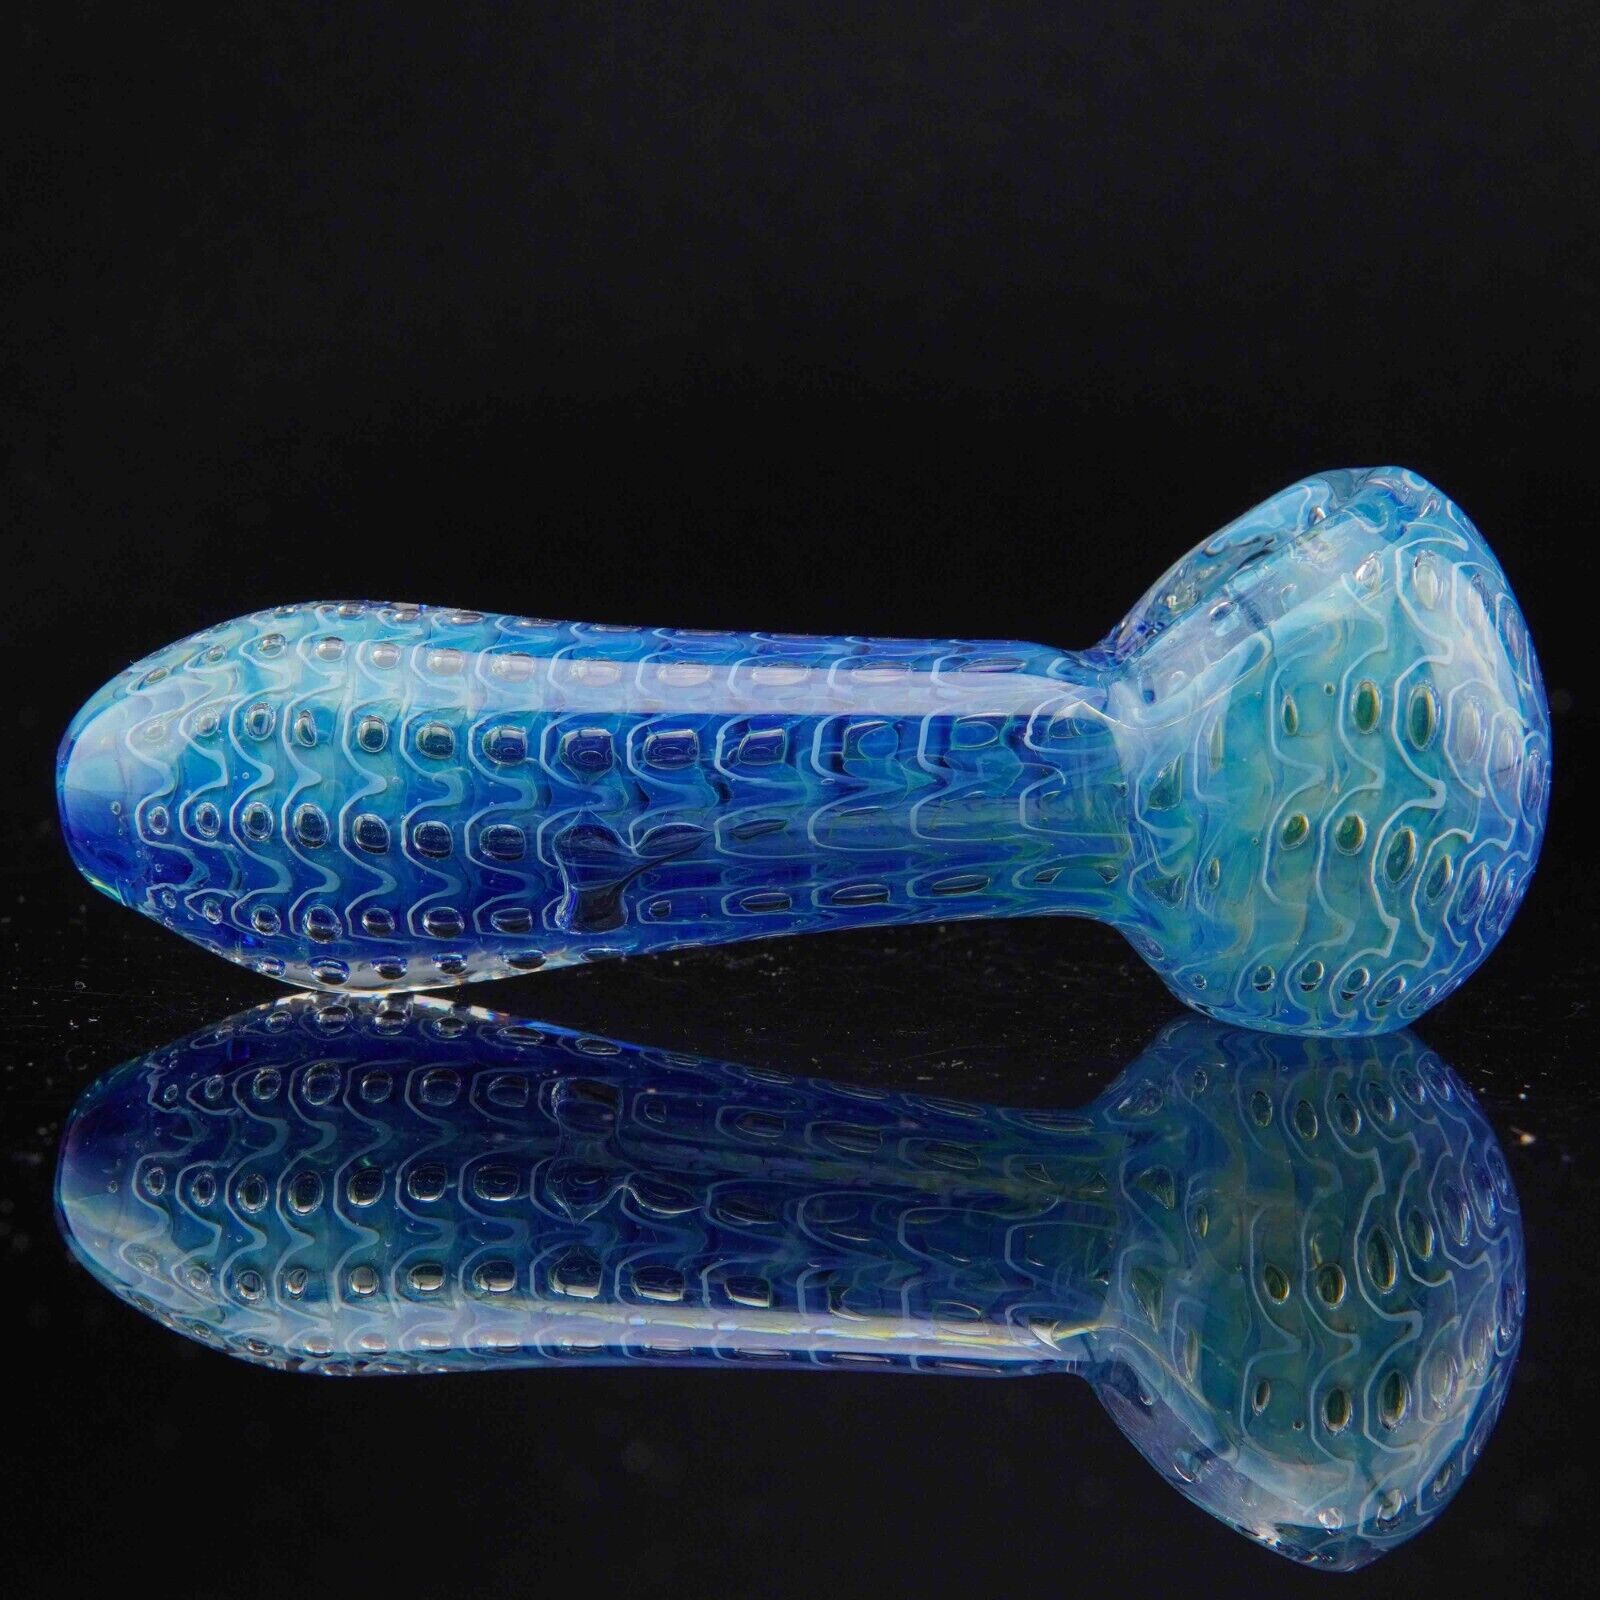 4.25 inch Handmade Thick Cosmic Blue Bubble Tobacco Smoking Bowl Glass Pipes